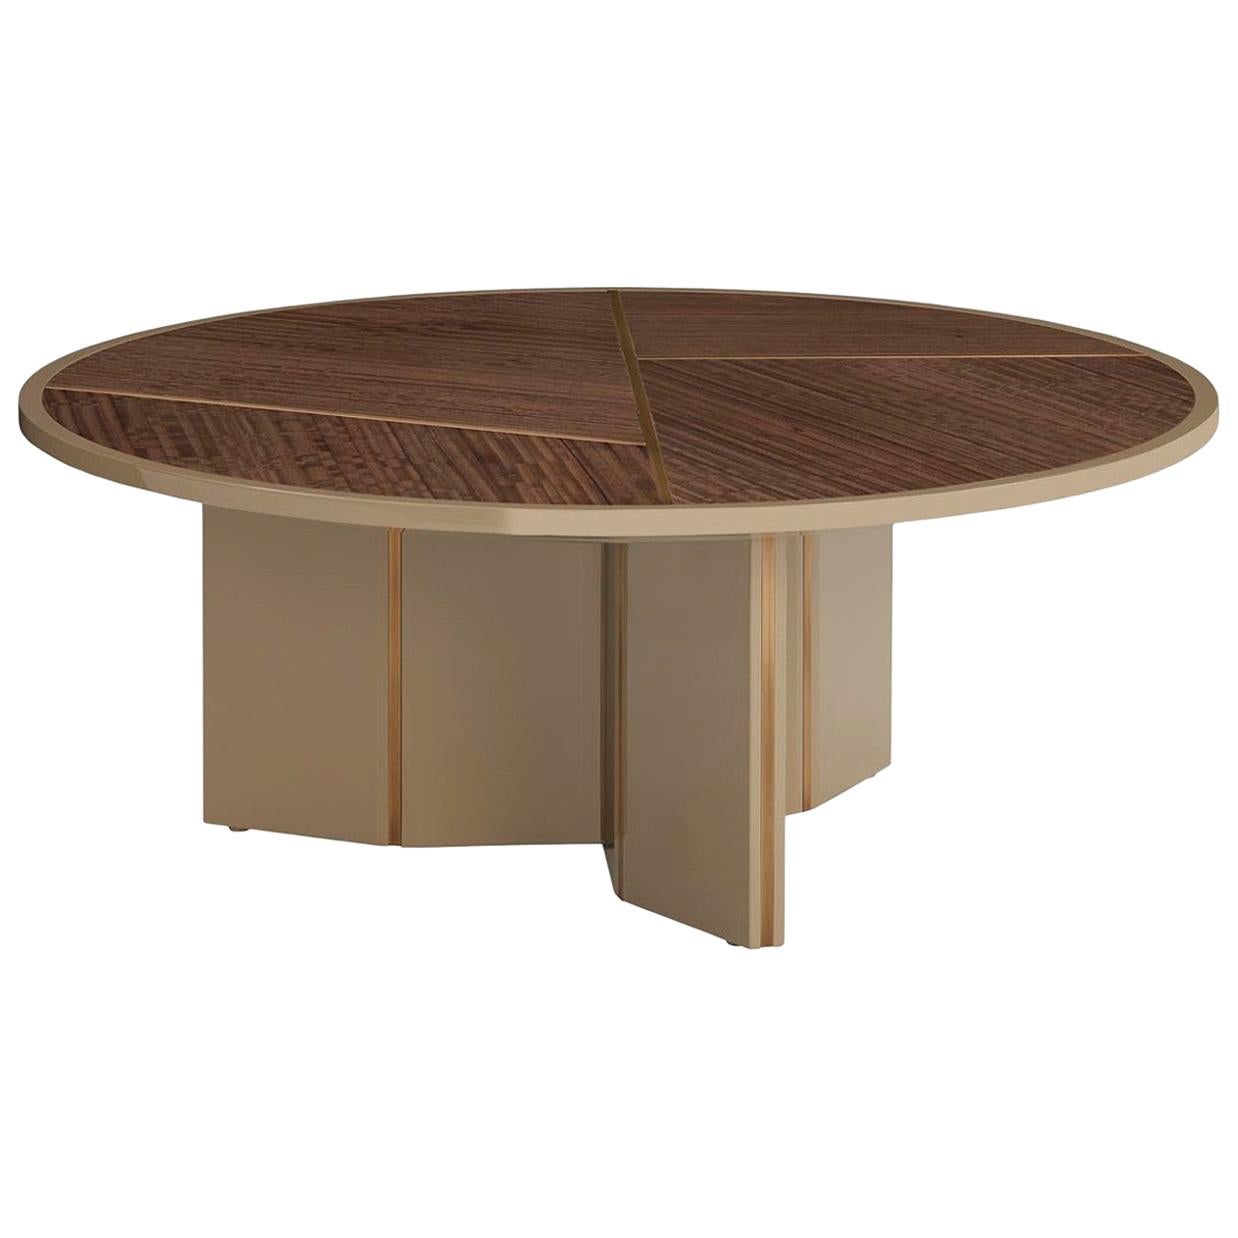 Lorca Coffee Table with Eucalyptus Frisé Top and Brass Color Trimmings